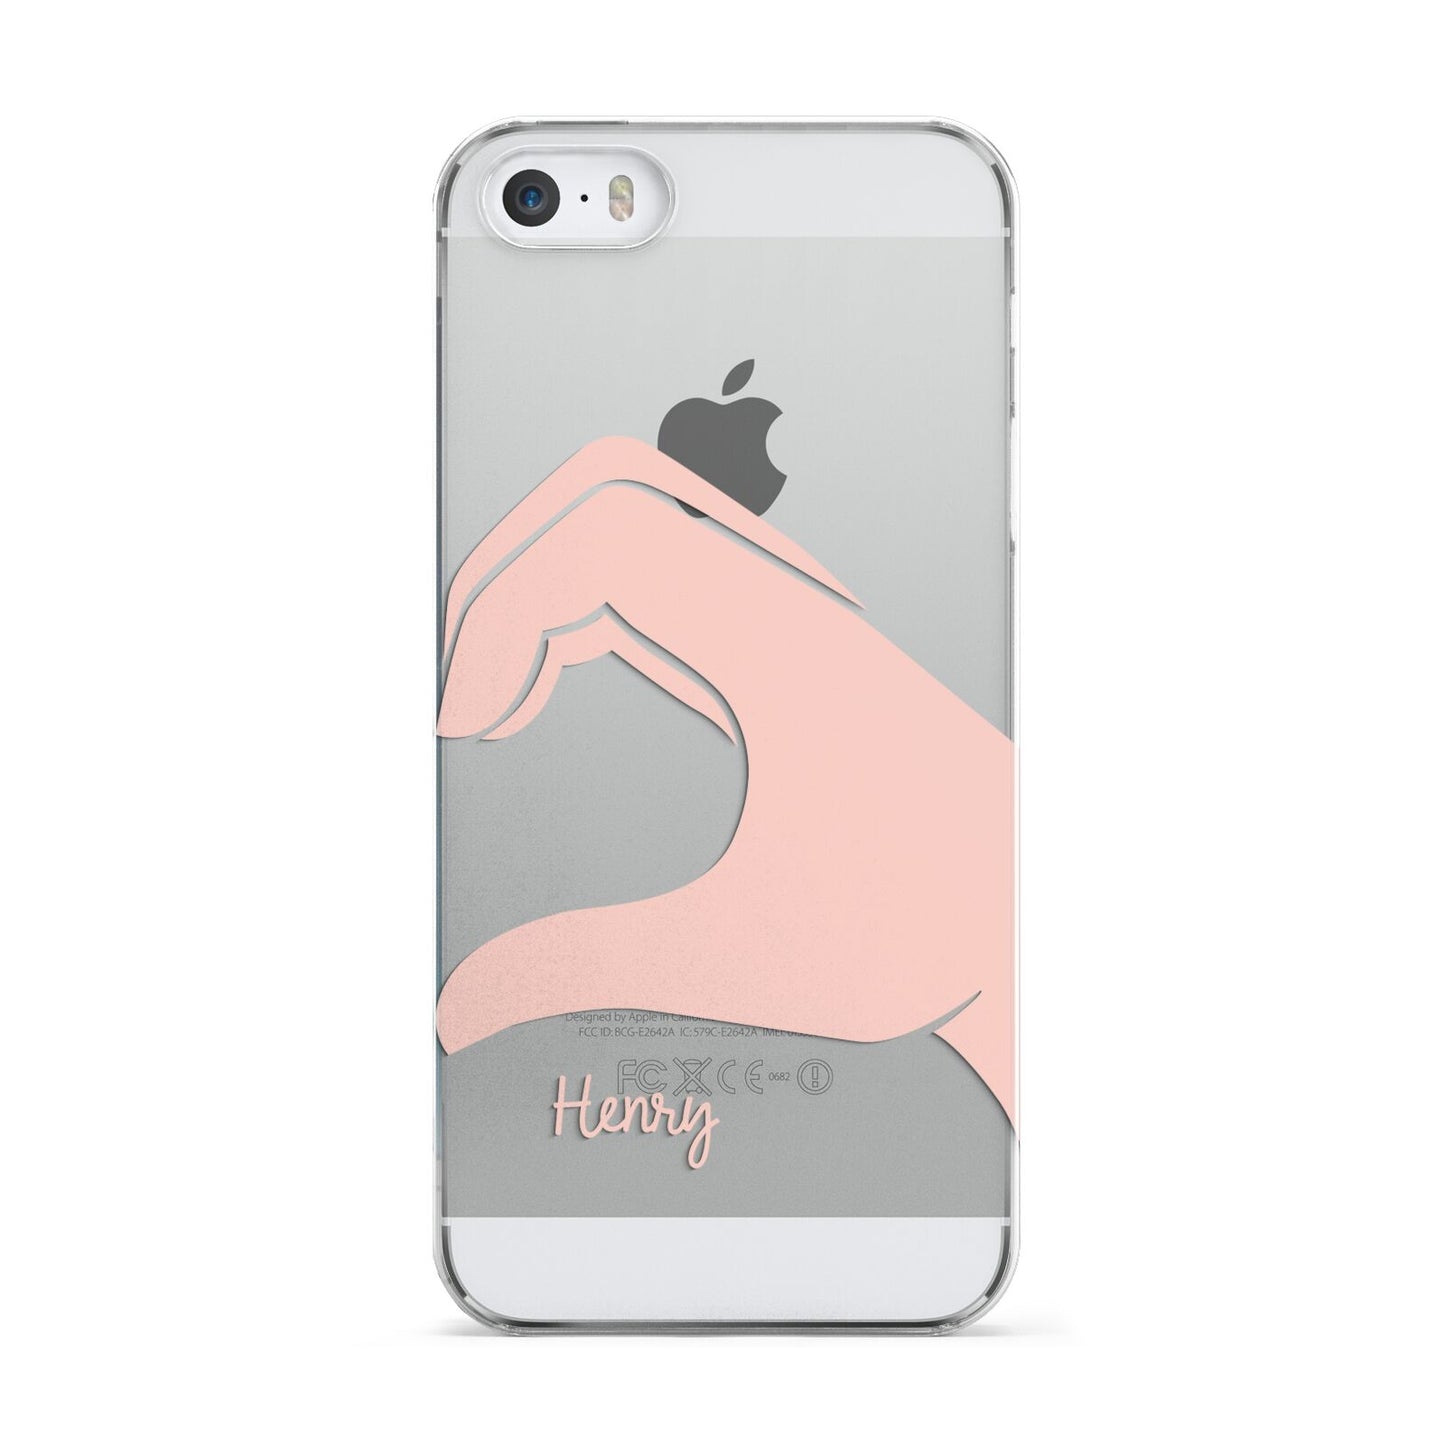 Right Hand in Half Heart with Name Apple iPhone 5 Case